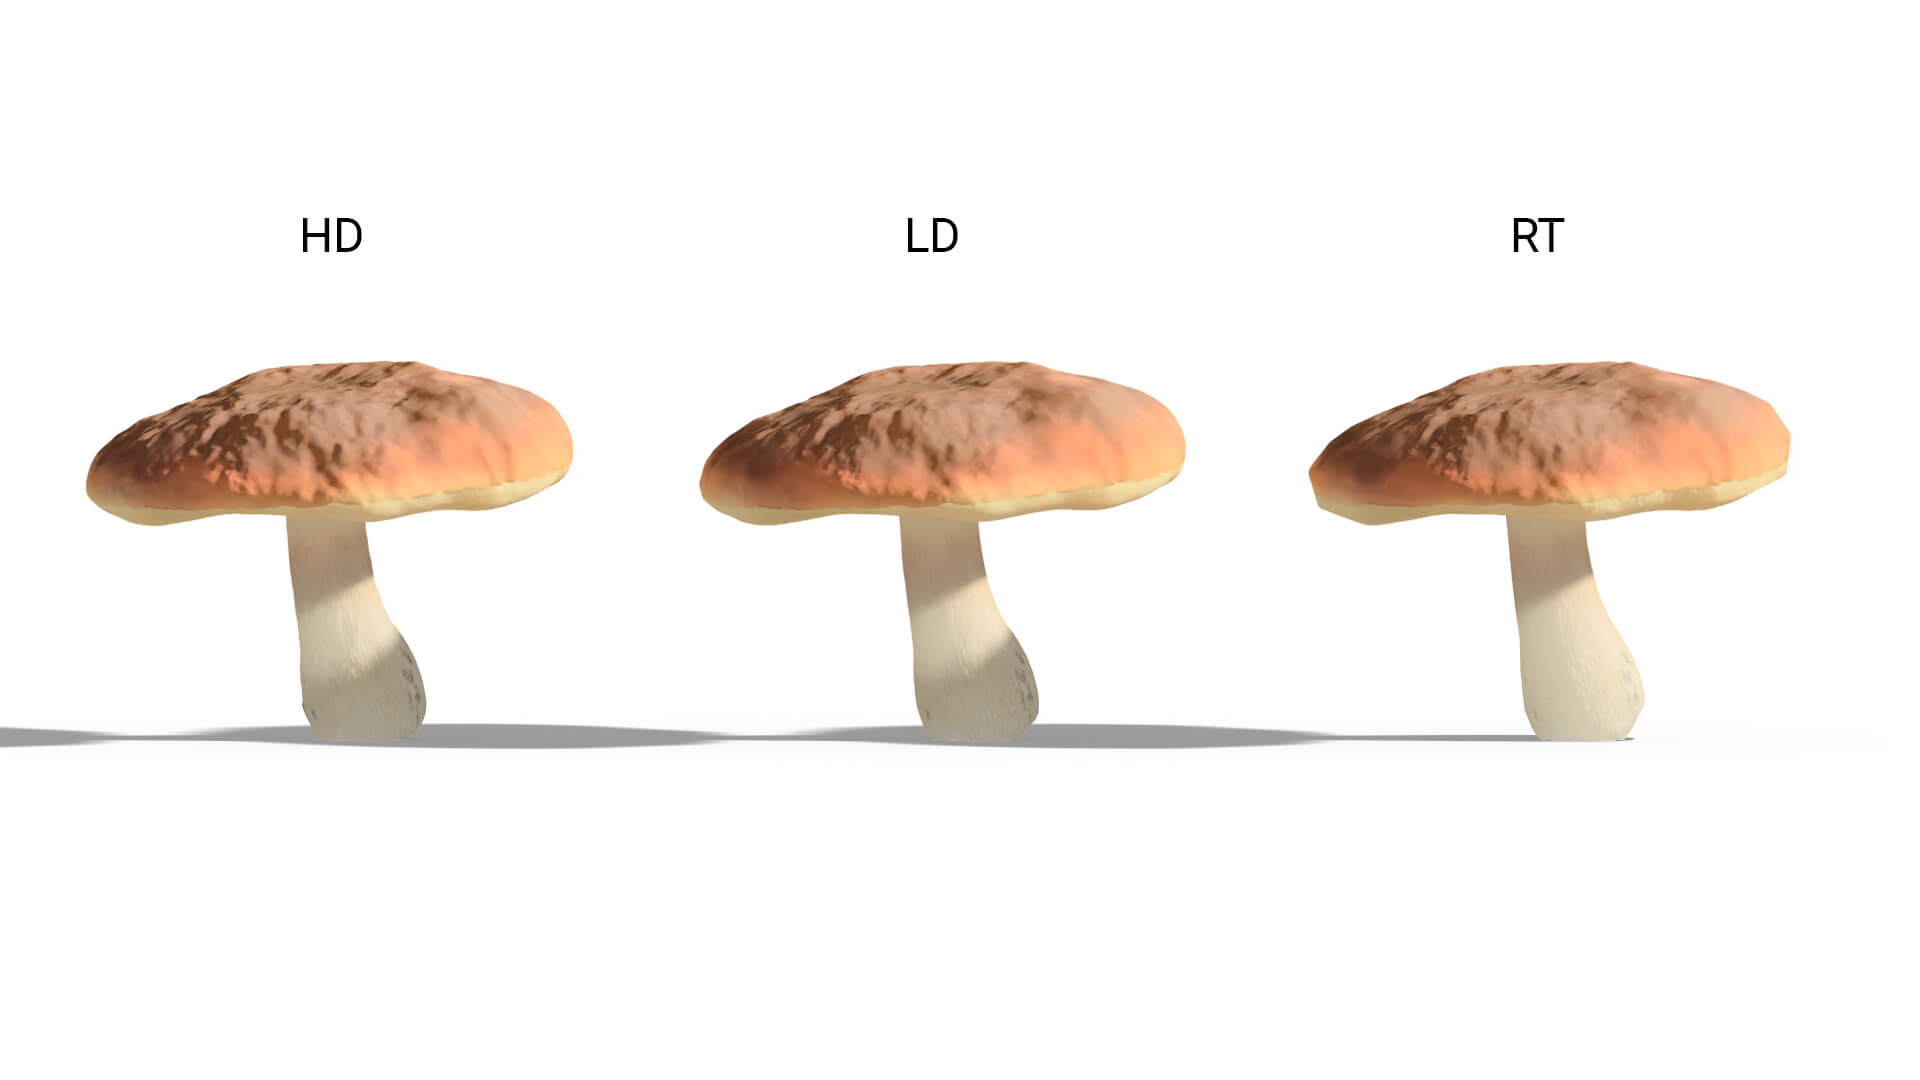 3D model of the Cep Boletus edulis included versions